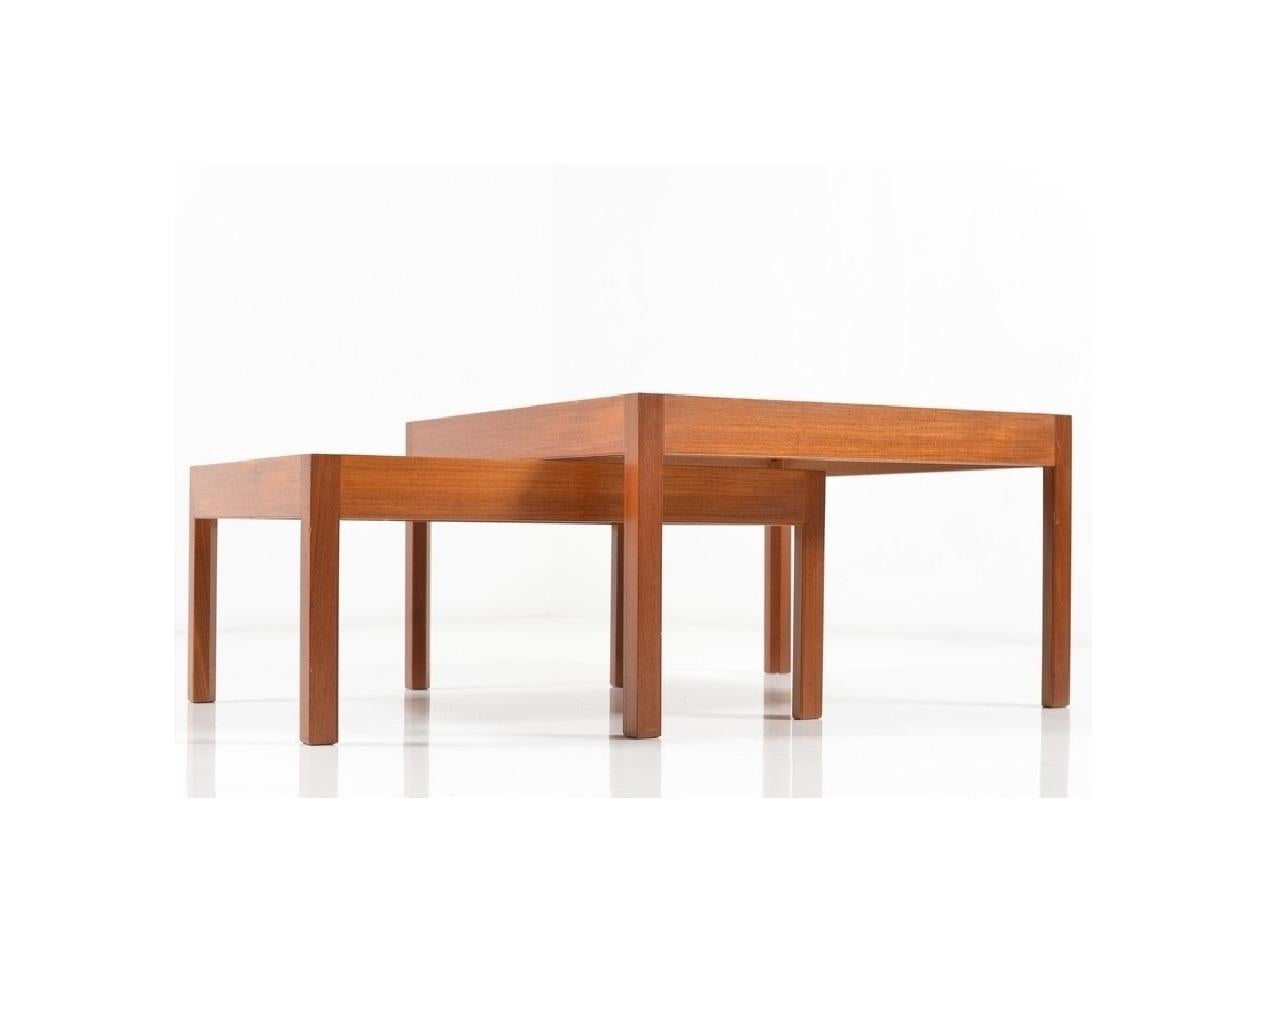 Coffee tables in Danish design teak 1960’s: 2 nesting tables in solid teak, excellent condition, high quality of manufacture.